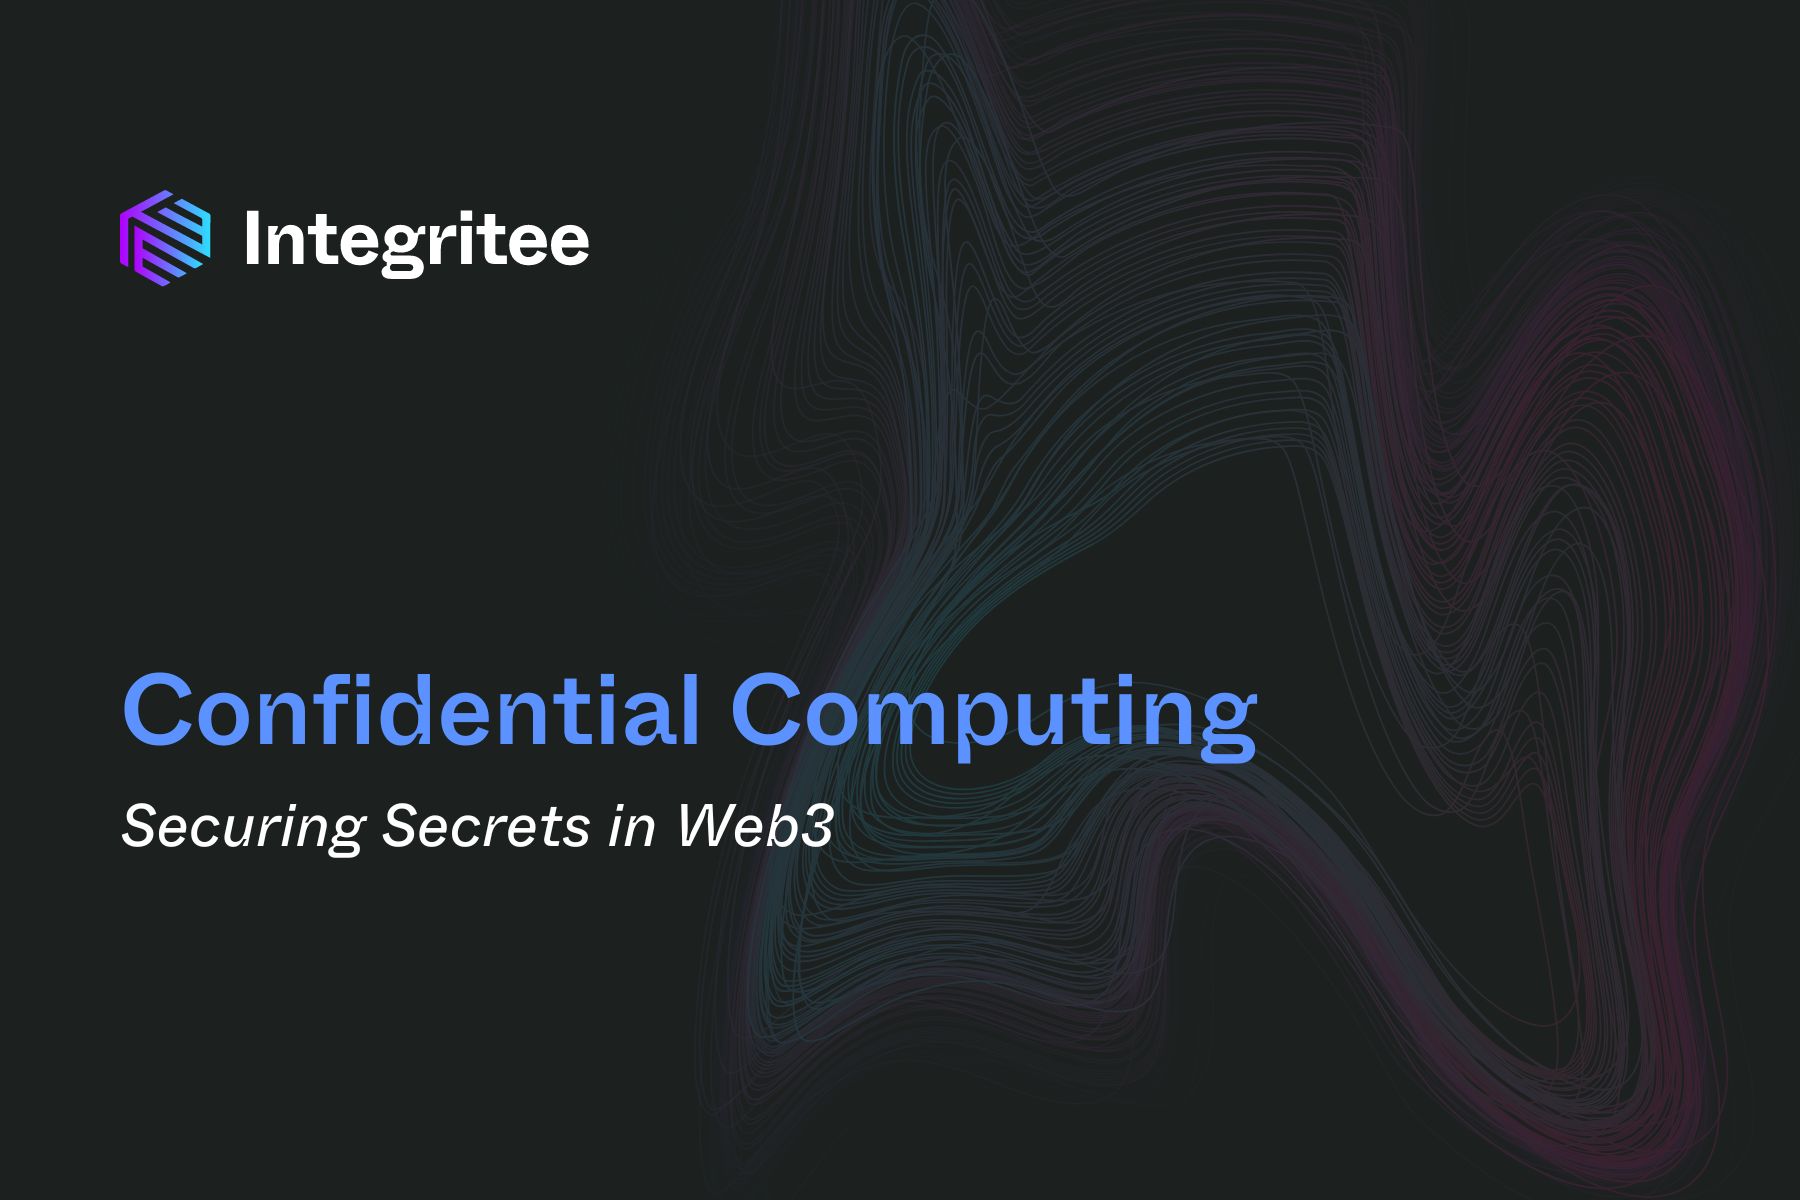 Confidential Computing Will Secure Our Secrets in Web3